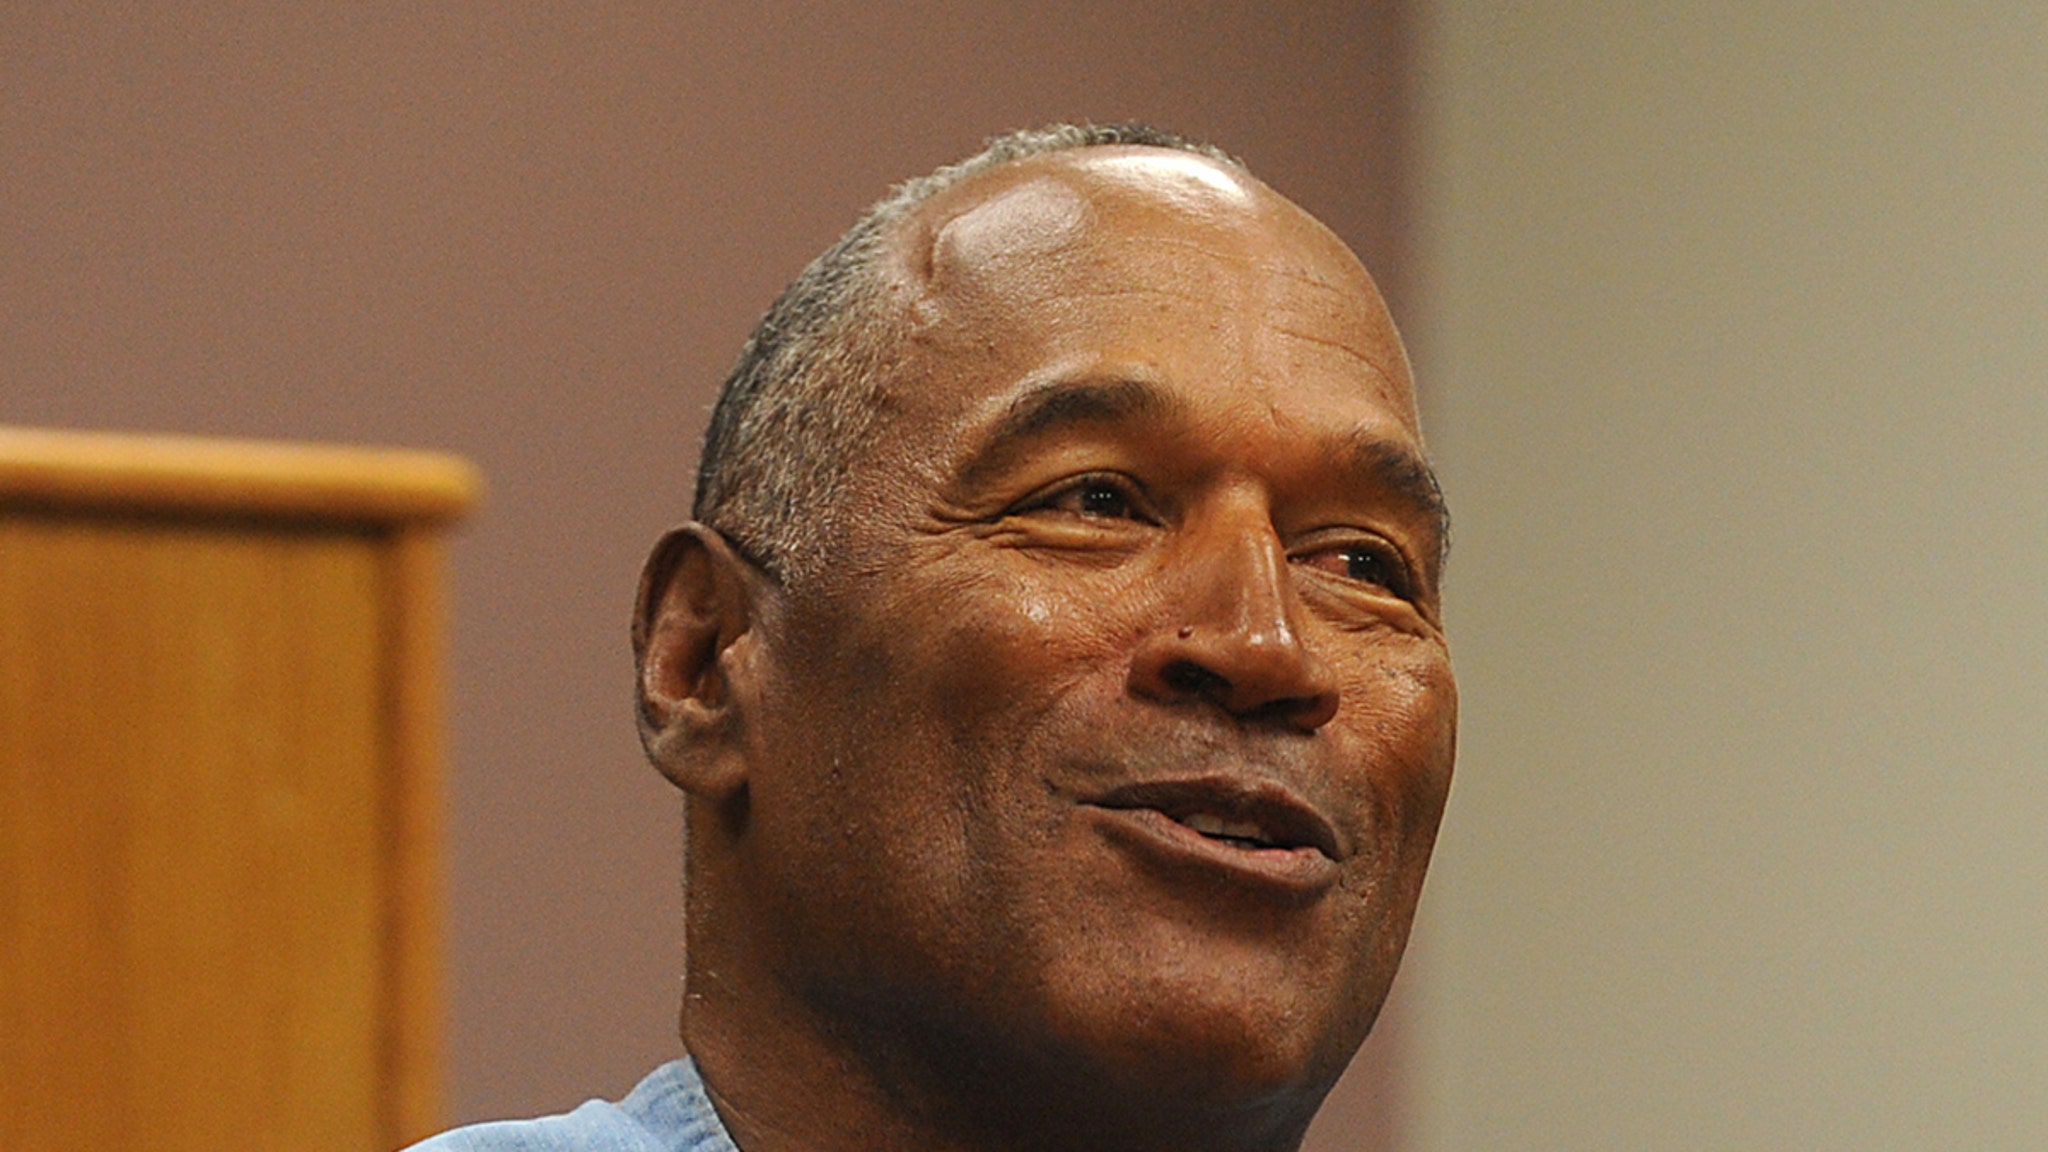 O.J. Simpson Won't Go to L.A. Out of Fear of Running Into Real Killer